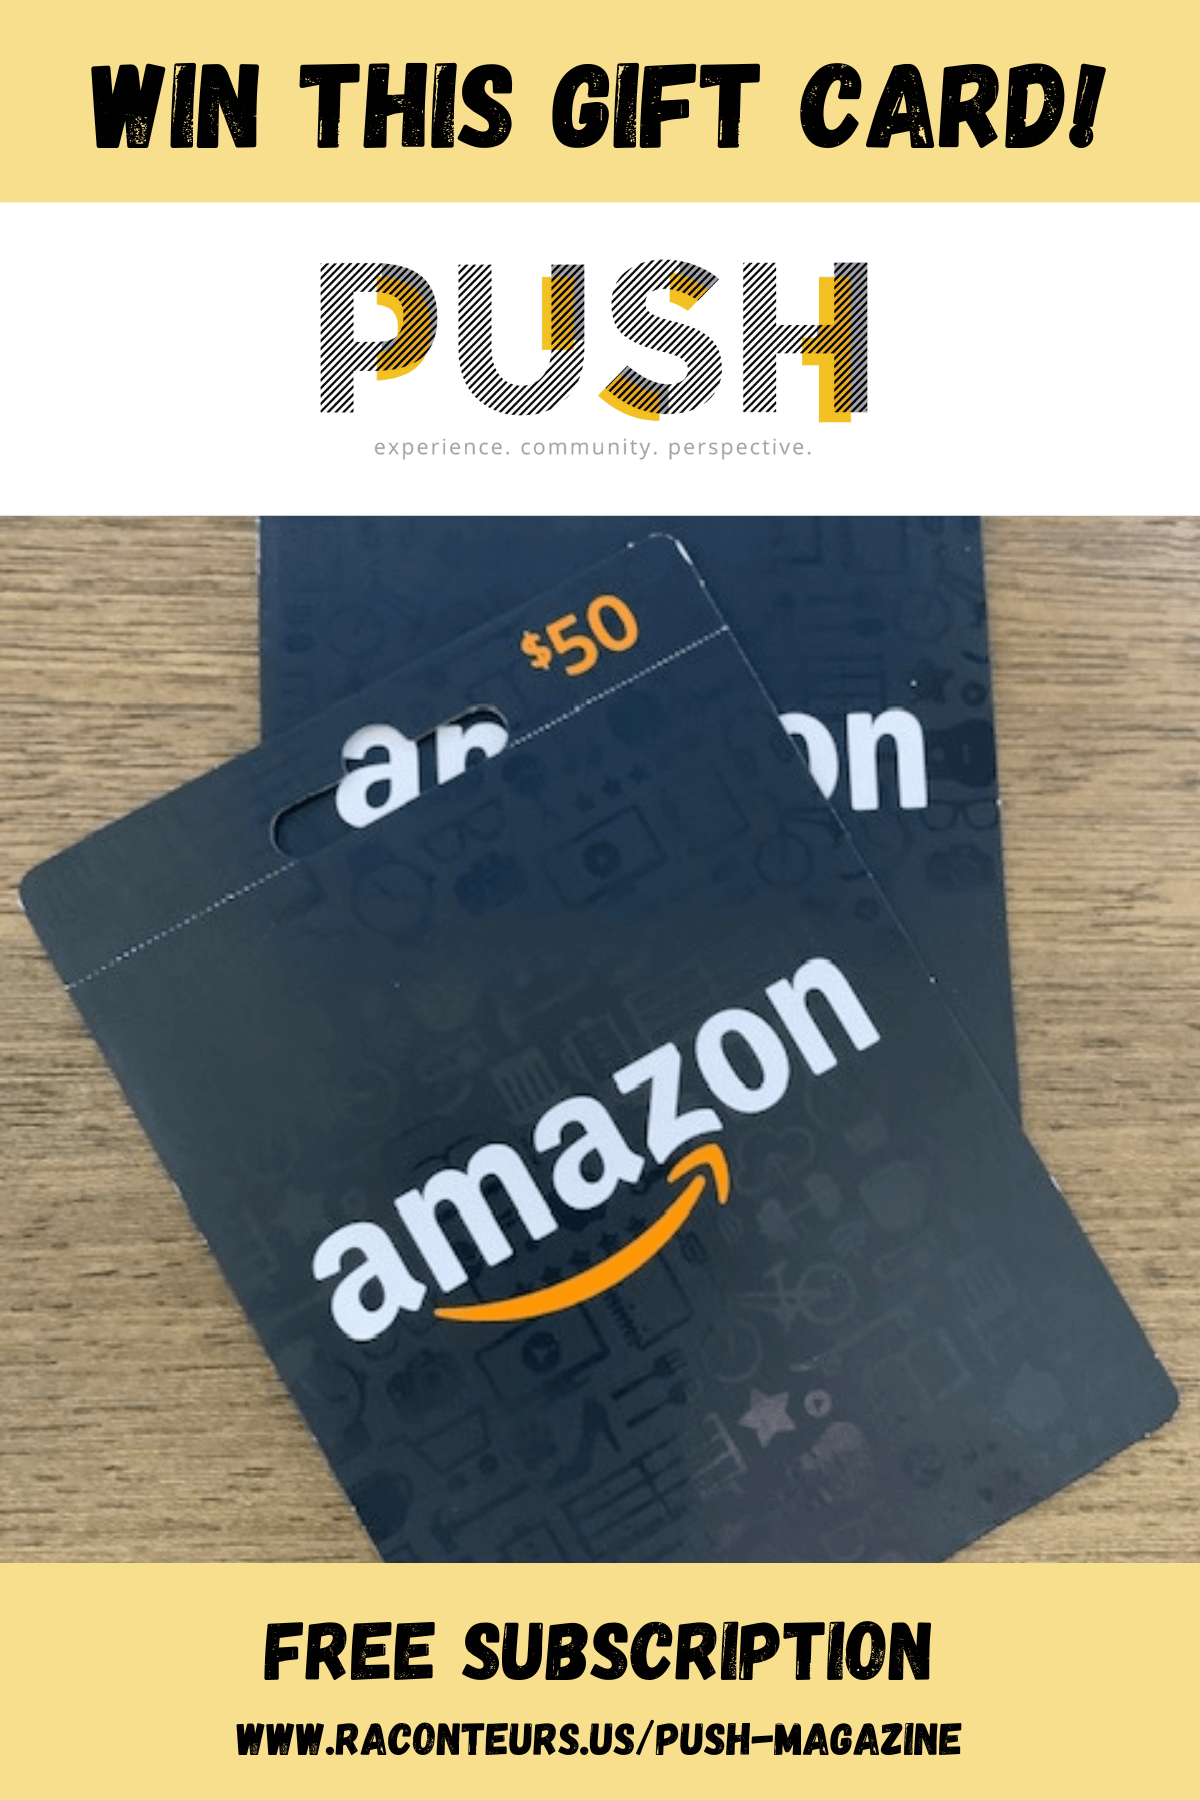 5 Reasons to Subscribe to PUSH Magazine